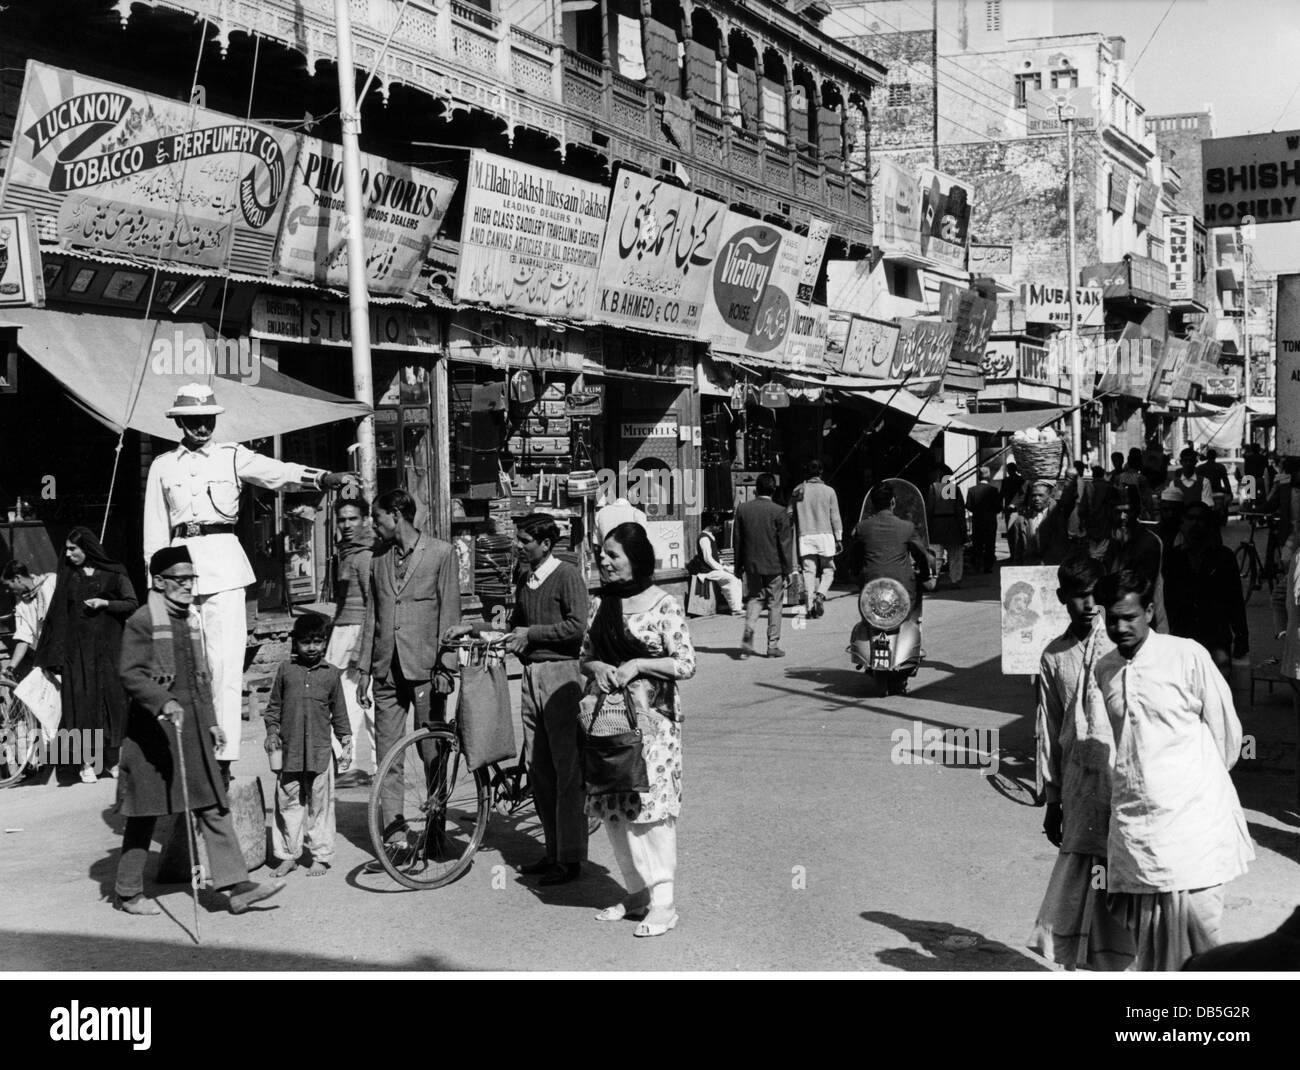 geography / travel, Pakistan, Lahore, street scenes, street scene in one of the poorer parts of the city, 1967, Additional-Rights-Clearences-Not Available Stock Photo